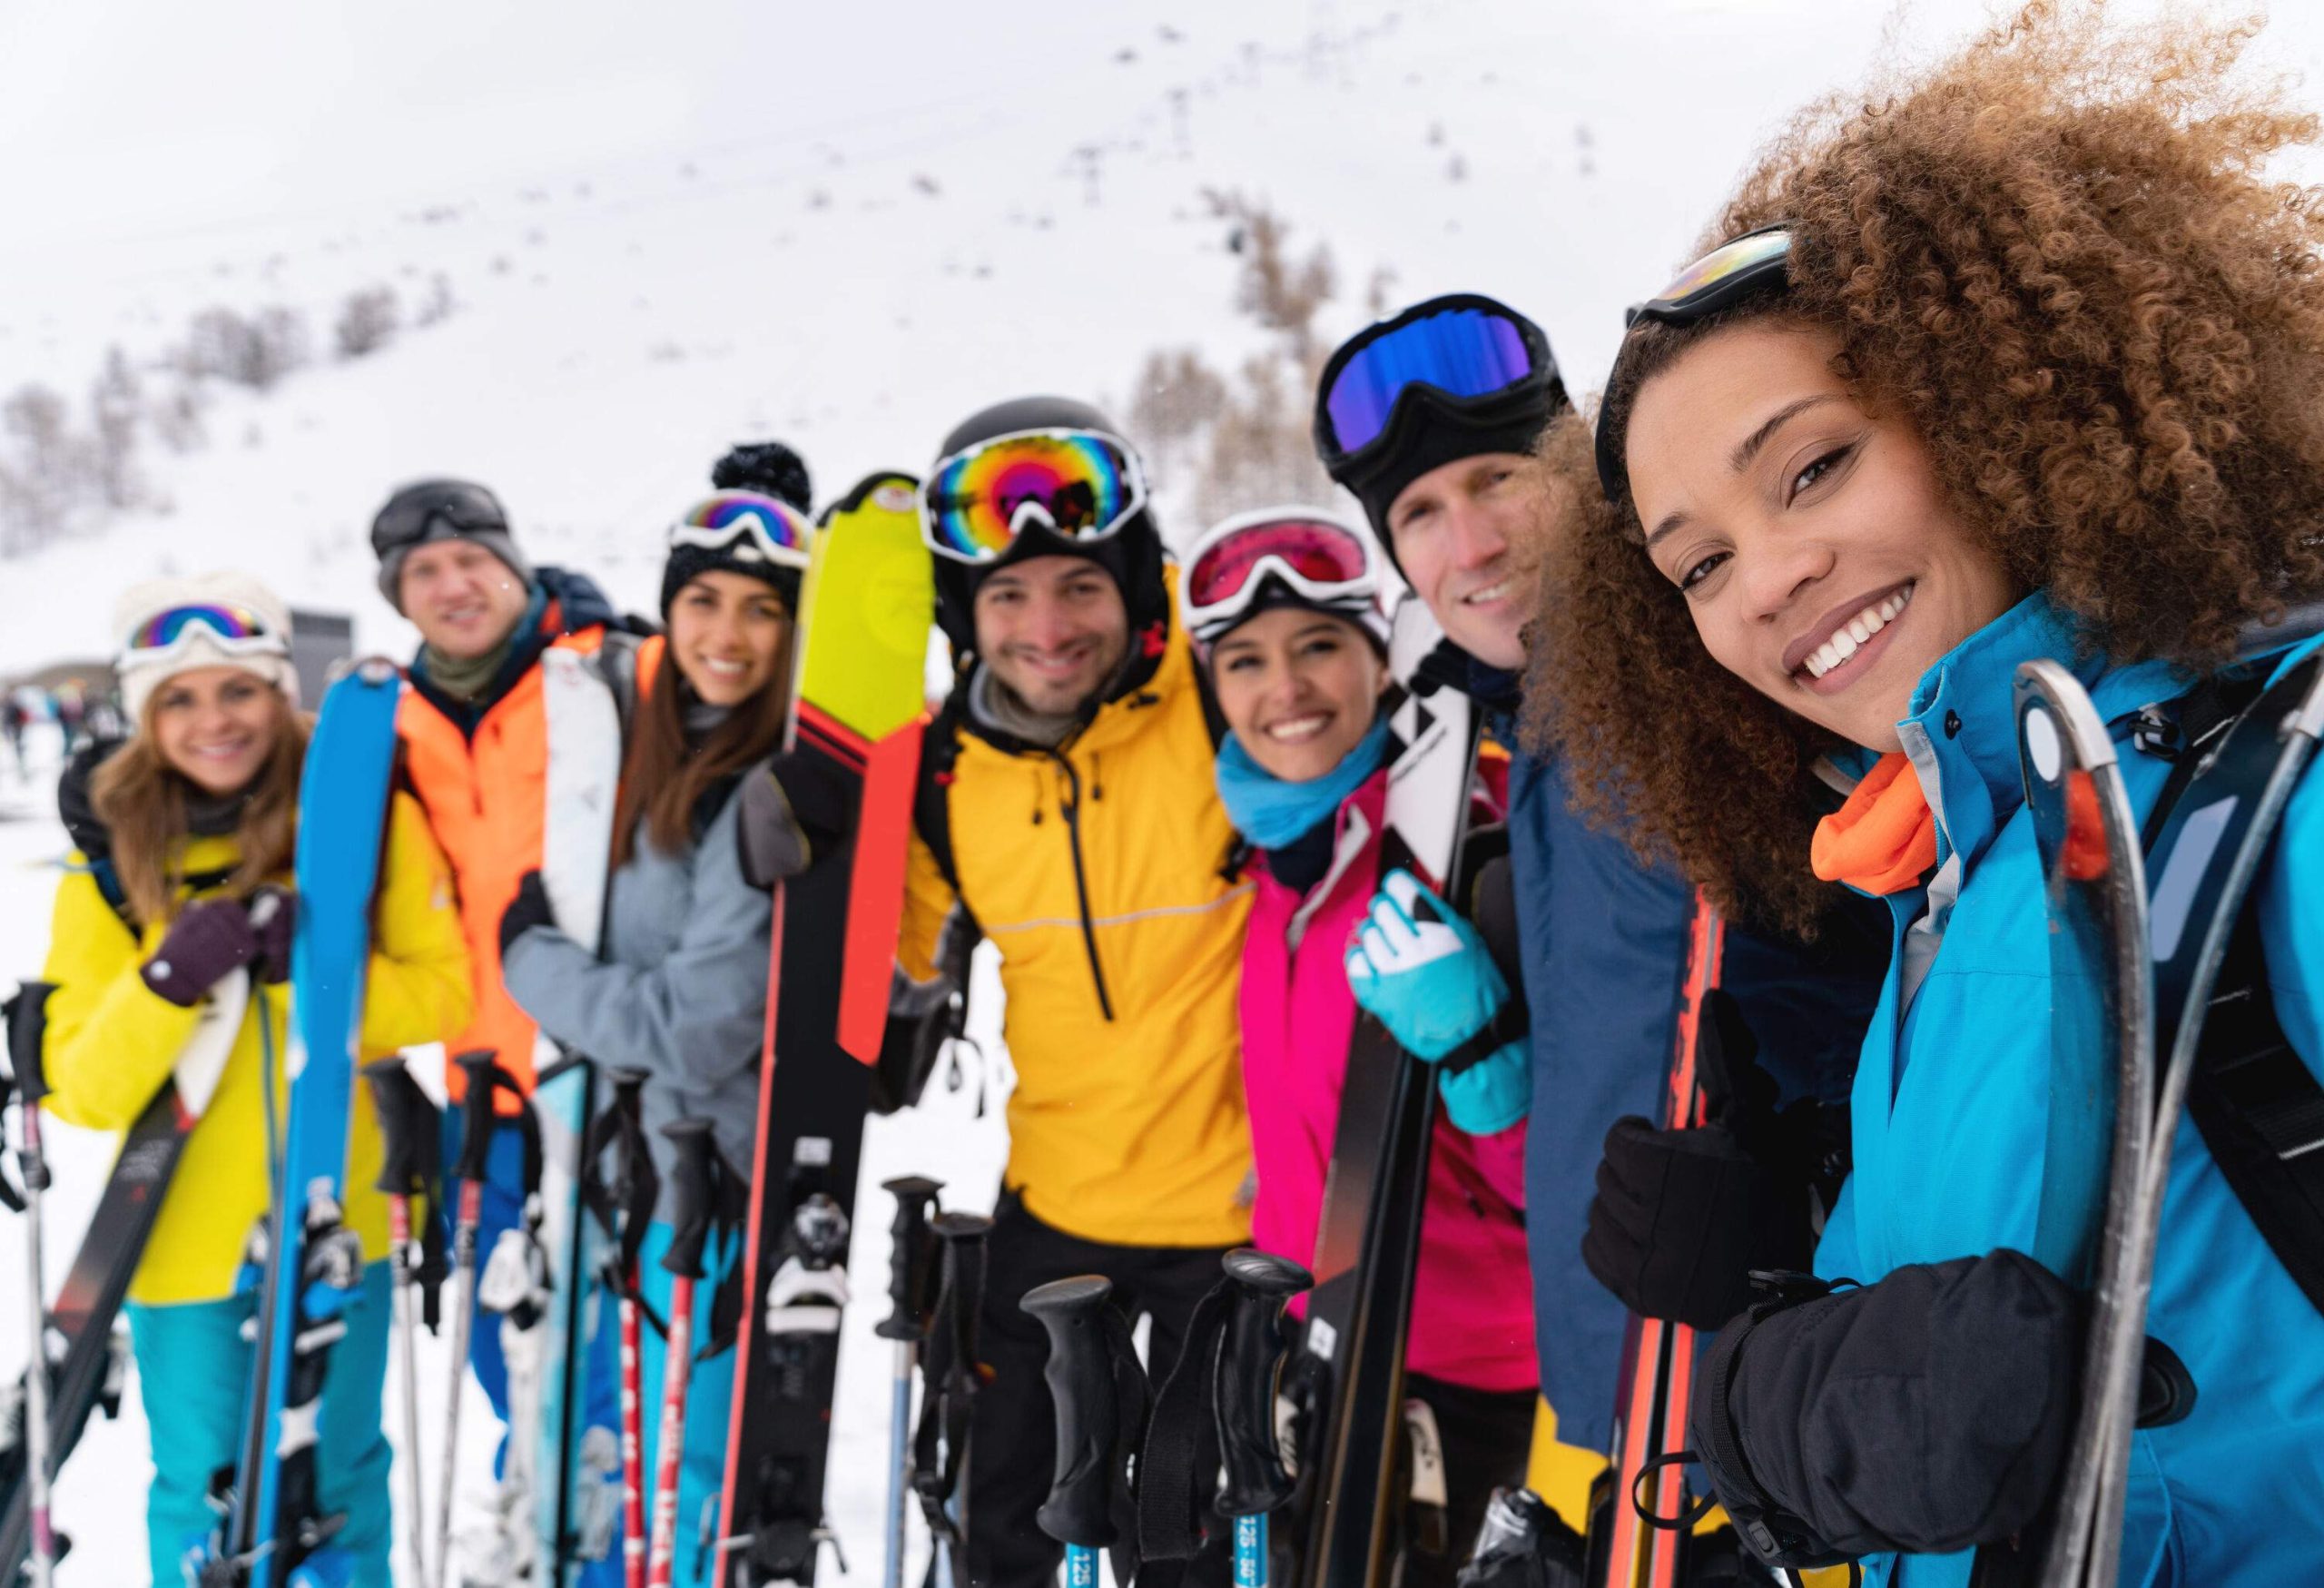 A smiling group of friends in colourful winter clothes lined up together holding their snowboards.